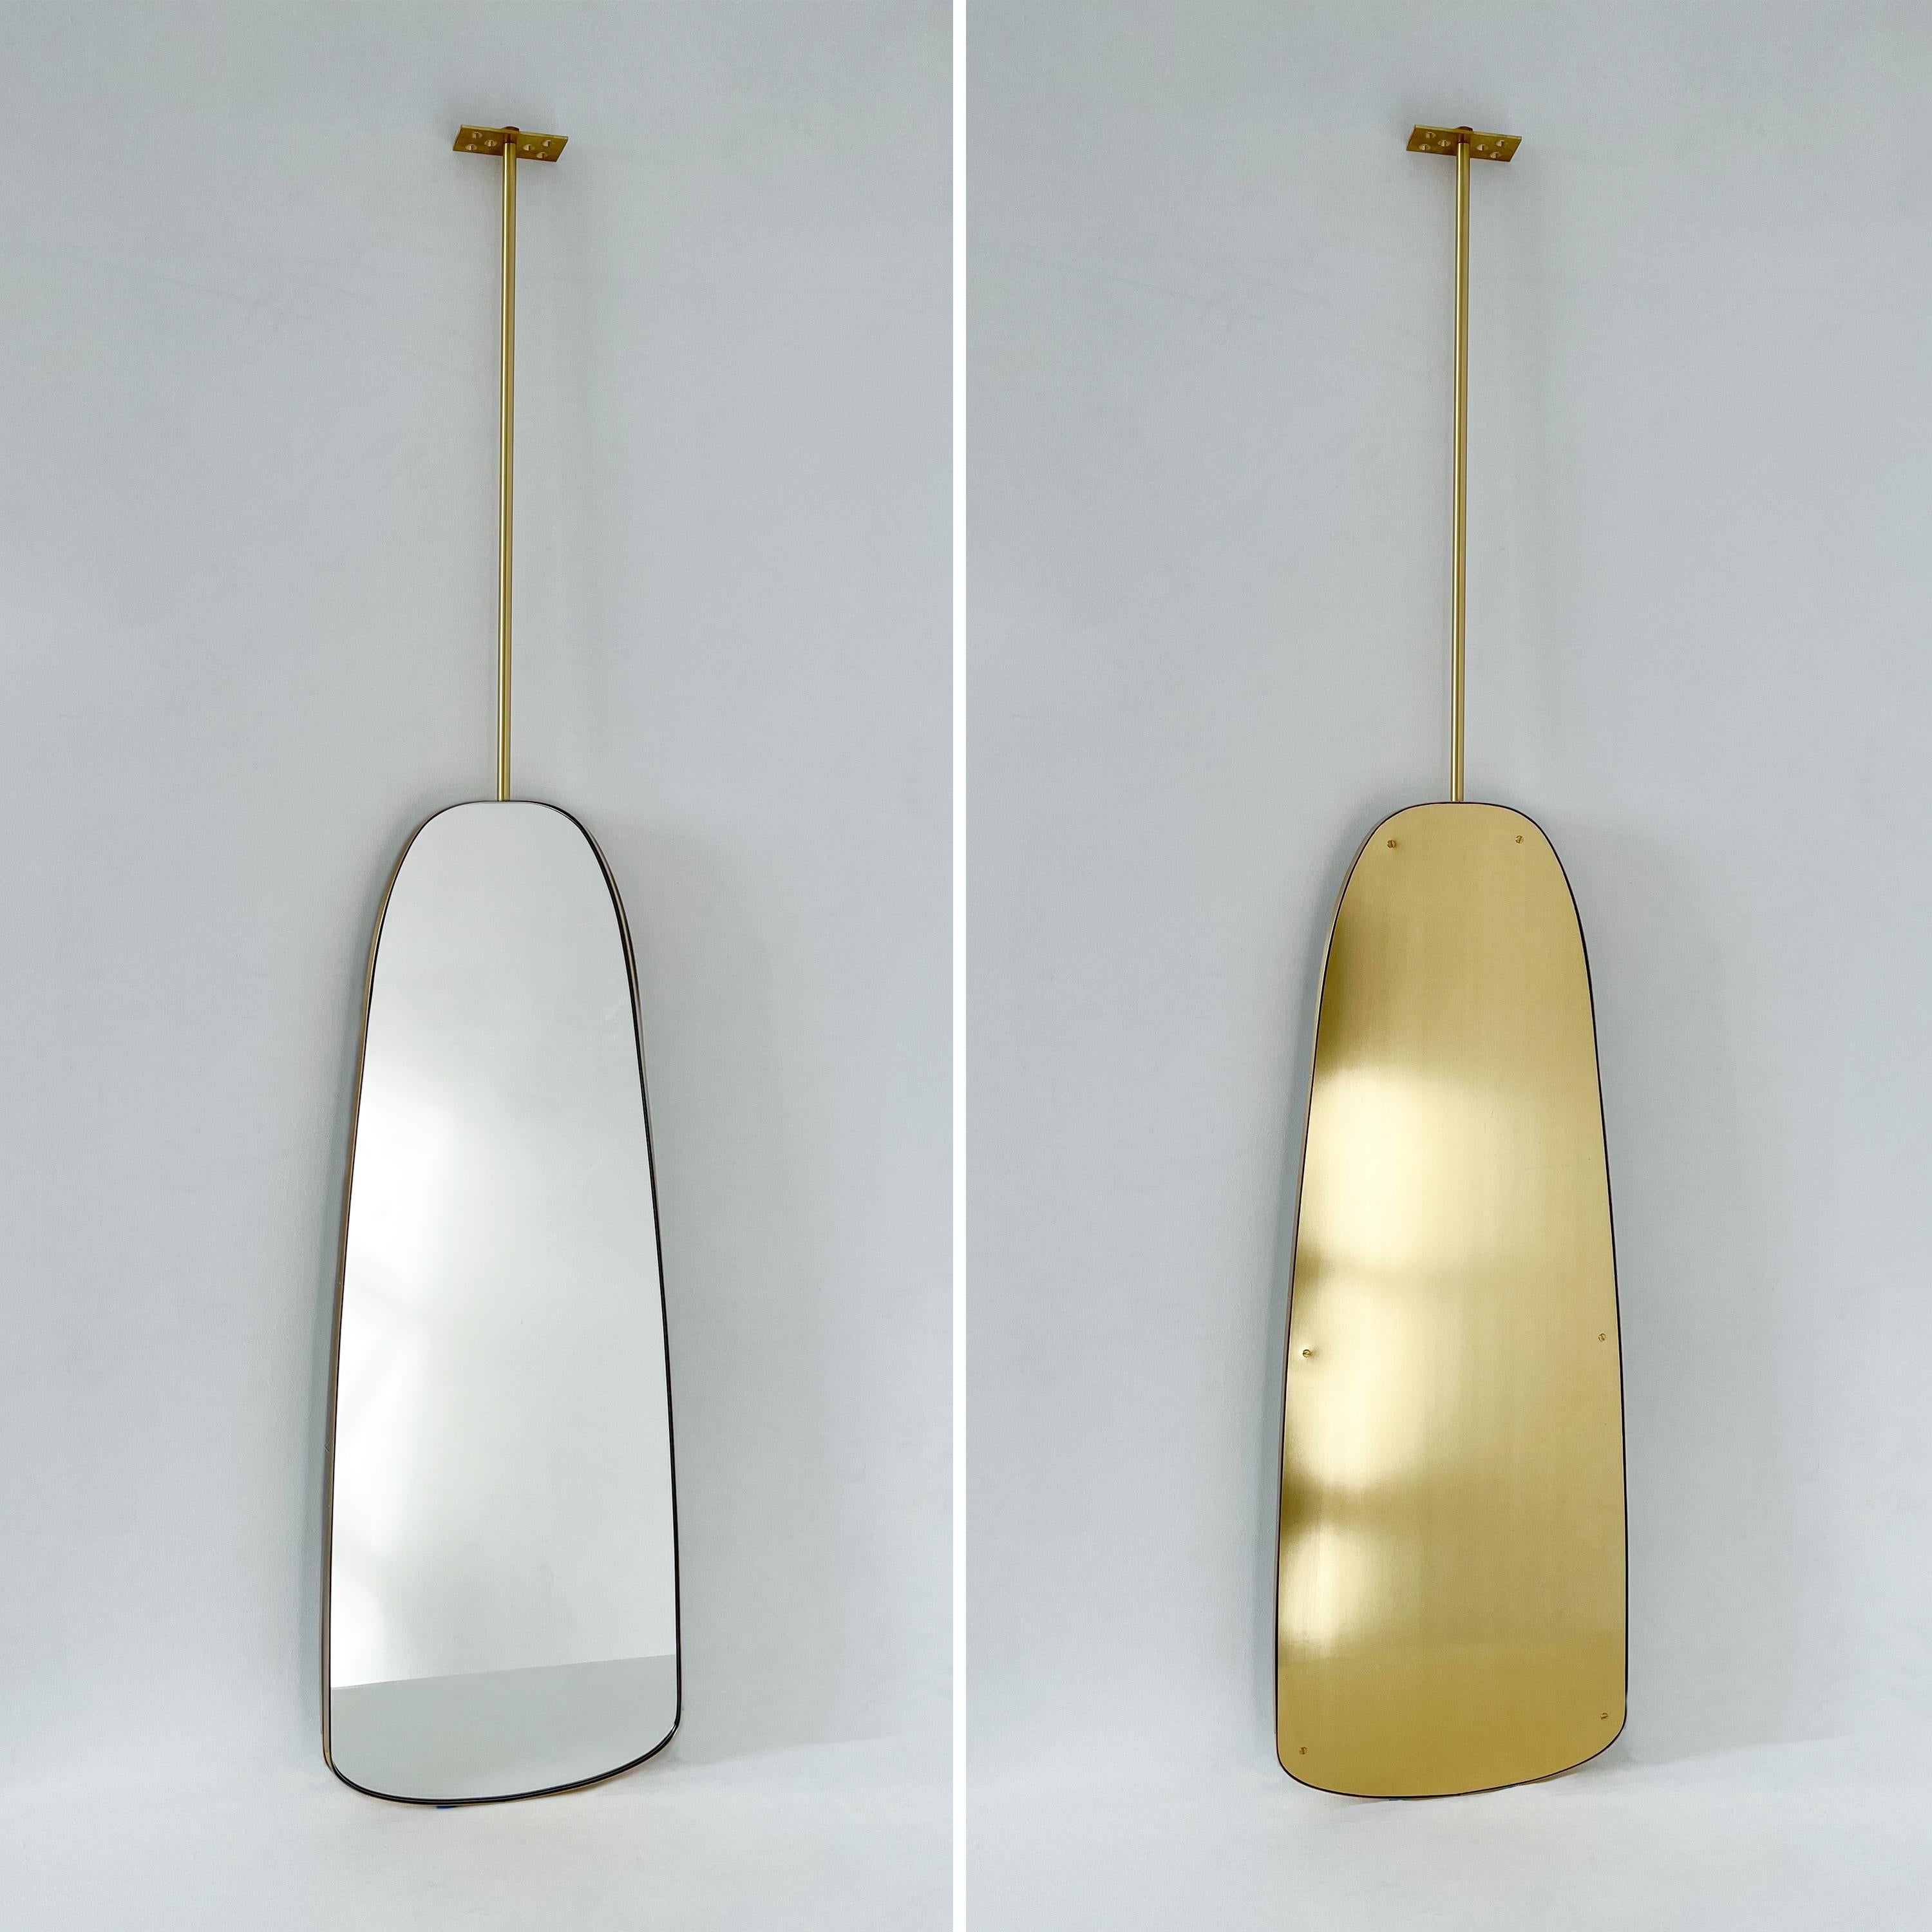 Art deco inspired ceiling suspended organic shaped mirror with an elegant solid brushed brass frame.

Mirror dimensions: 360mm (14.5